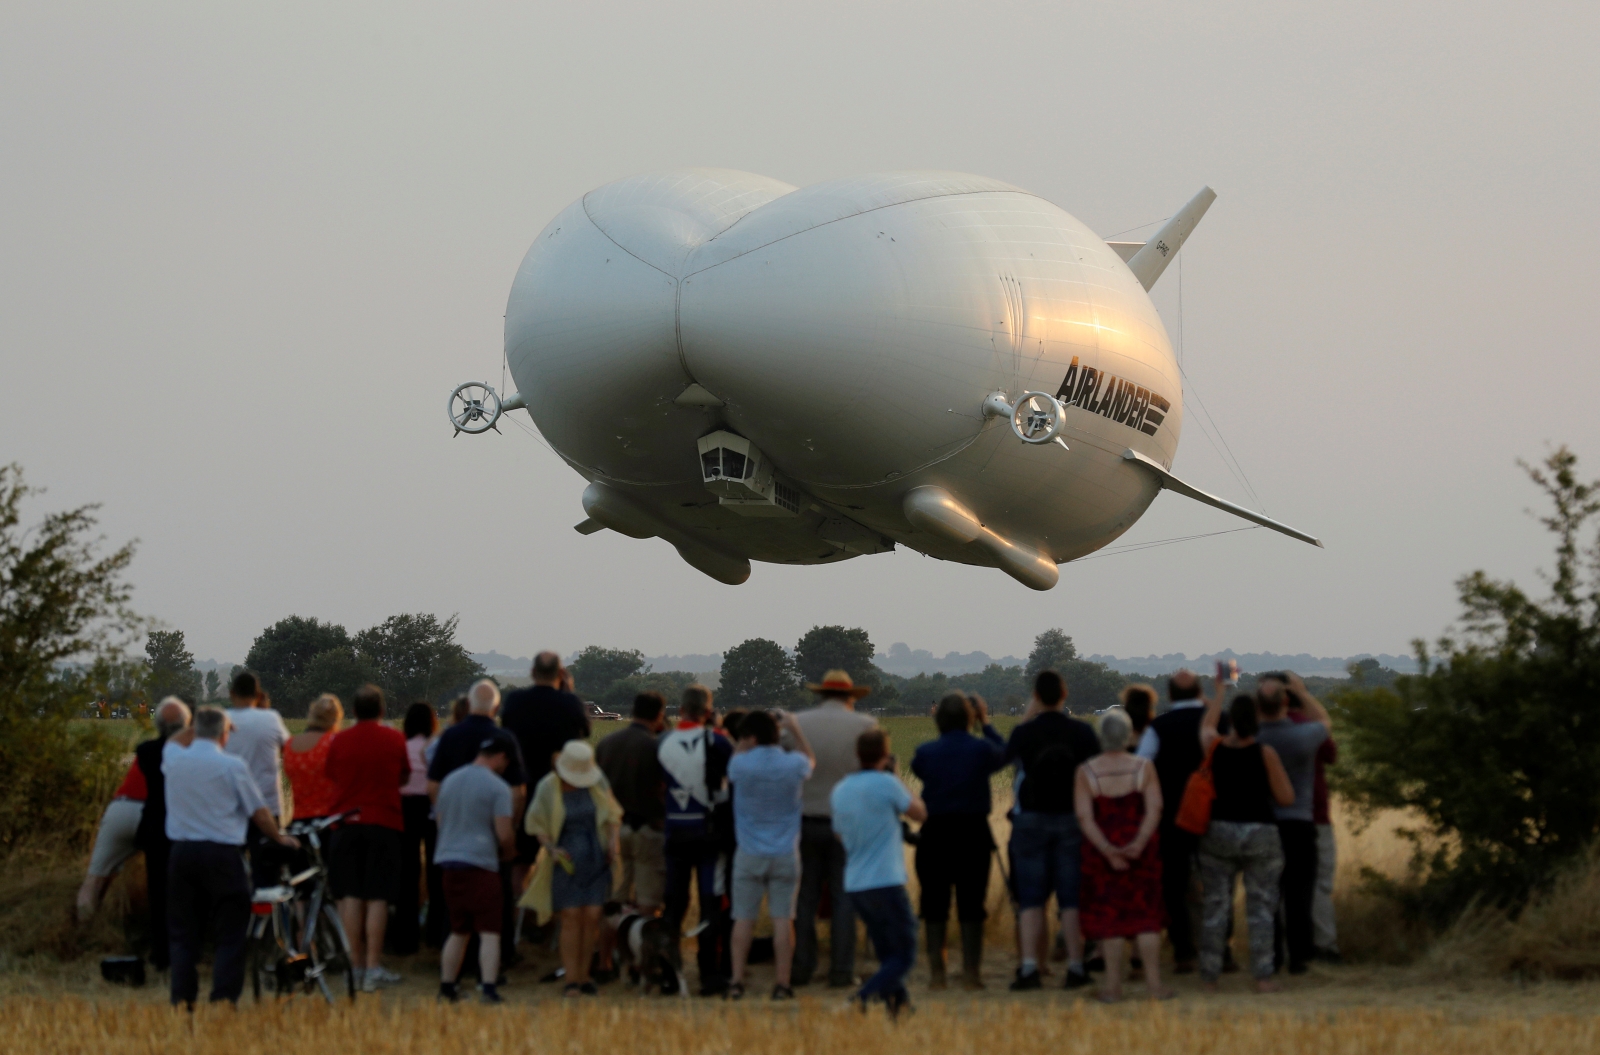 Cheering spectators gather to watch the 'Flying Bum' on its maiden